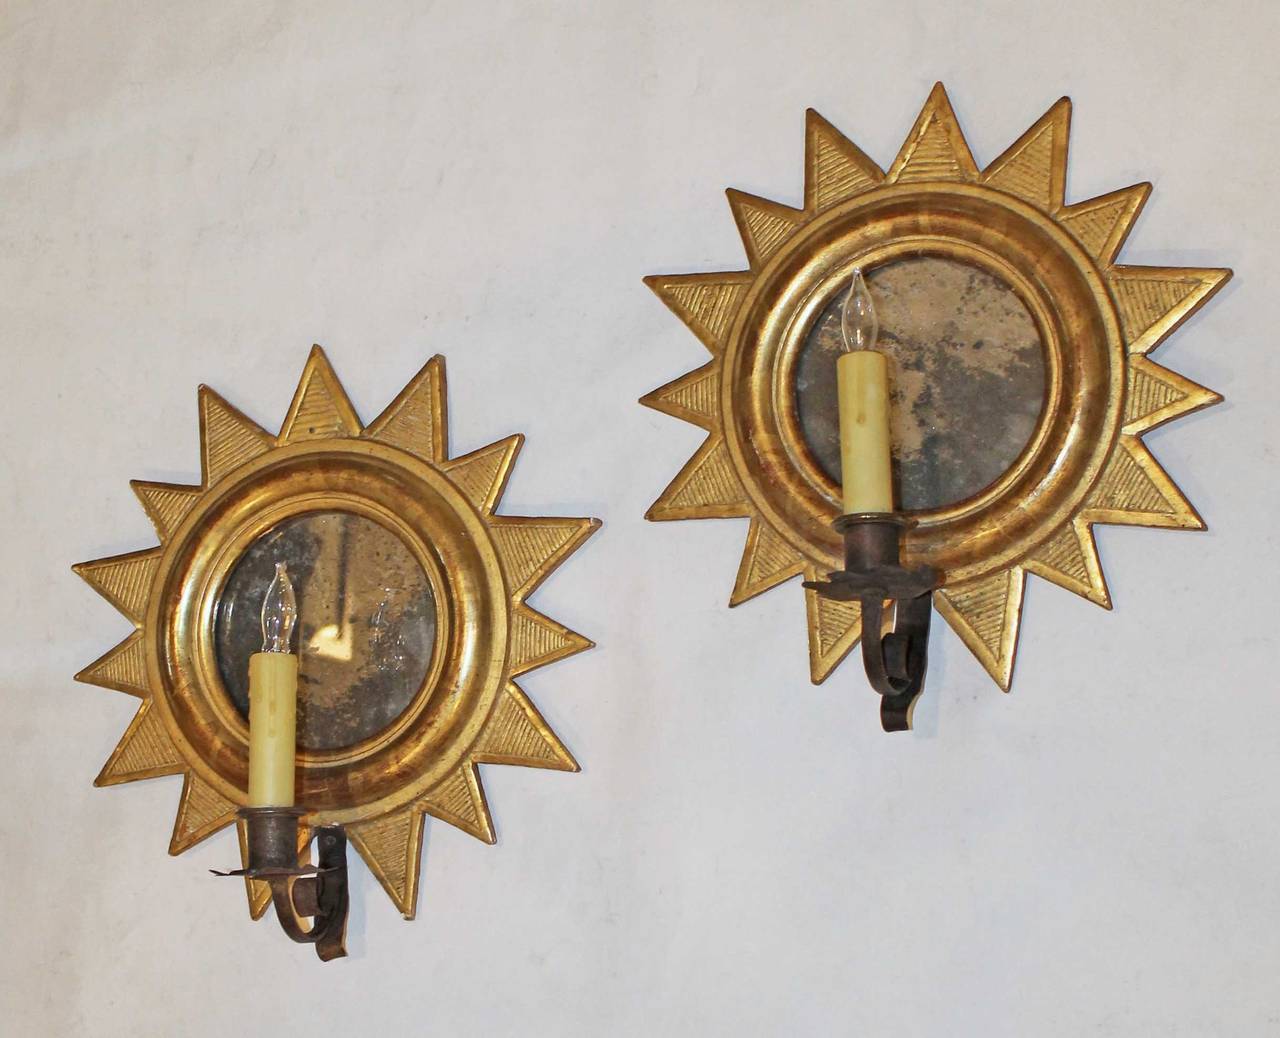 A rare and beautiful pair of sunburst soliel giltwood Directoire style wall sconces, late 19th Century. The 24k water gilt finish is exquisitely applied, the mirror backs having the patina of age. Originally candle sconces with hand forged iron